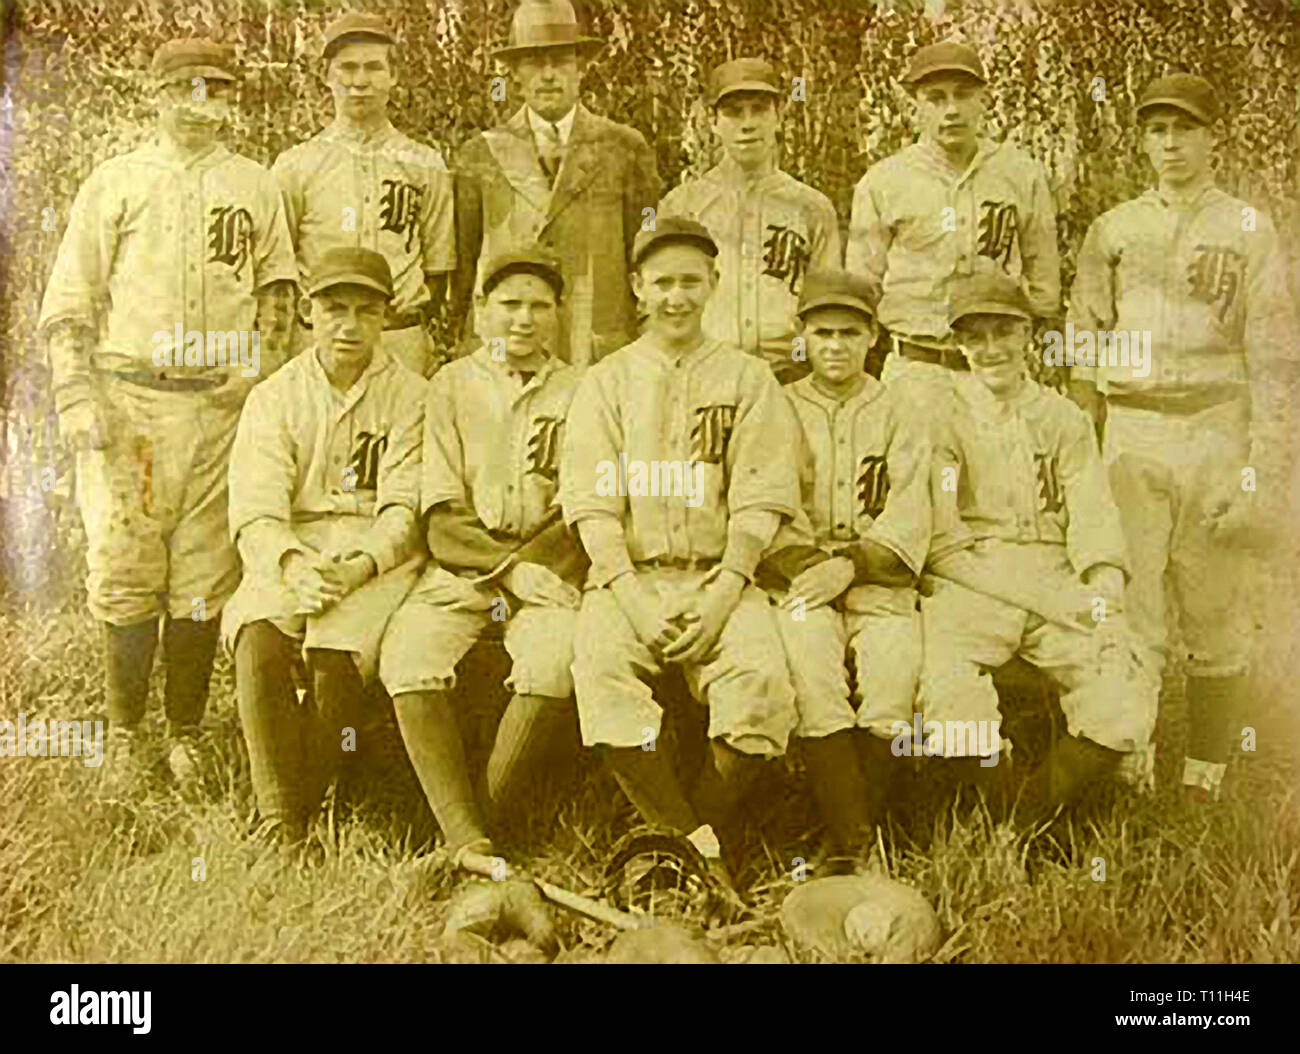 Photos of early America-Sports portraits. Stock Photo